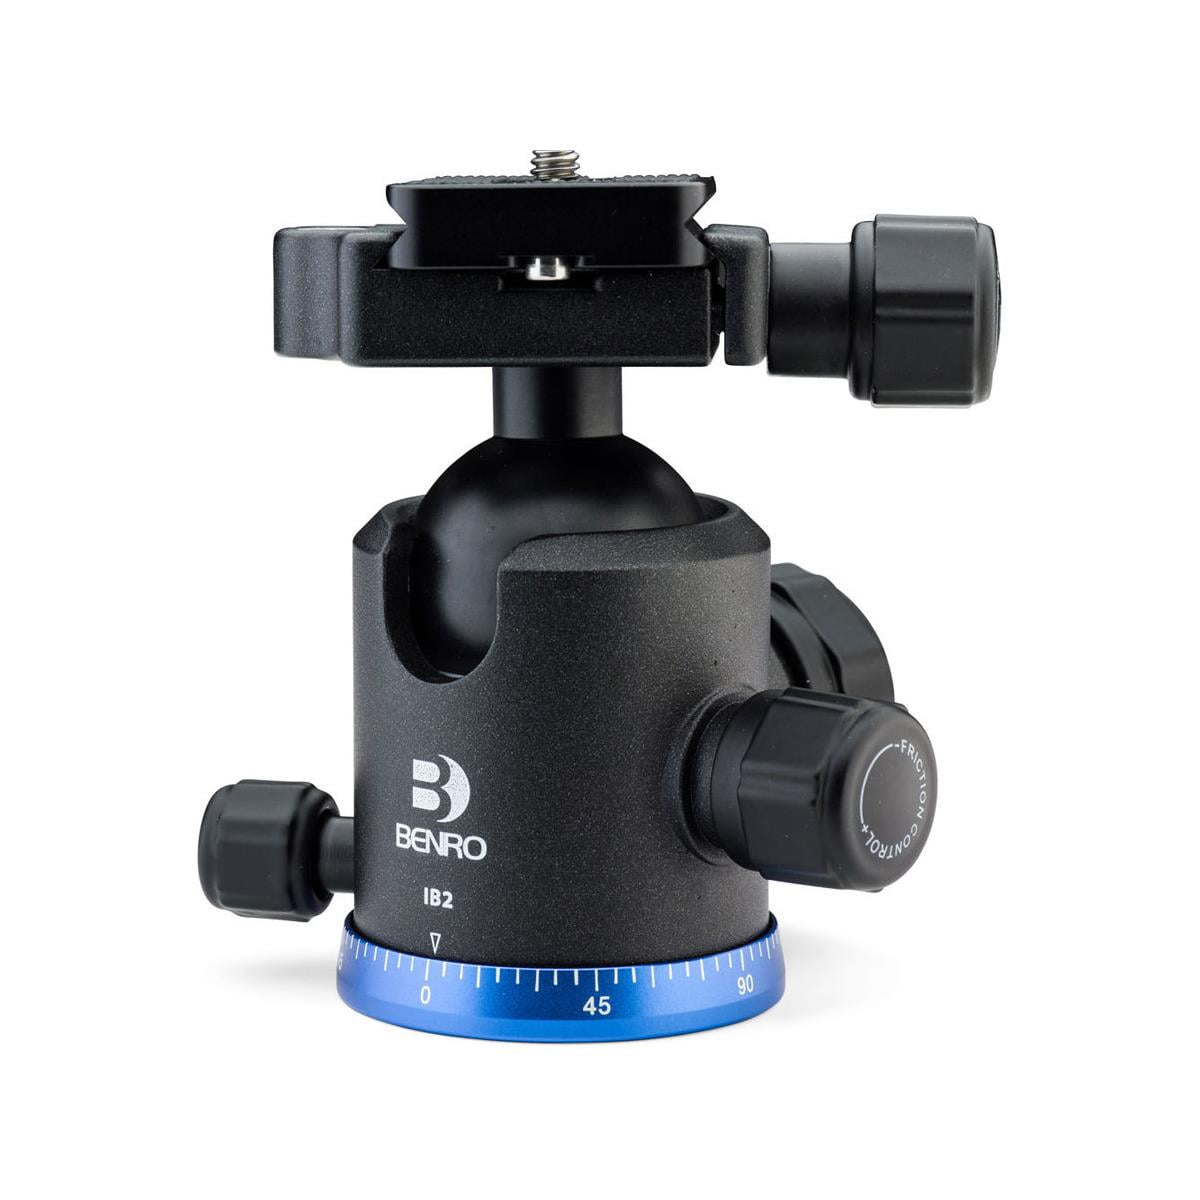 WuLian Quick Release Plate L Bracket for Benro Arca Swiss/Markins/Photoclam/RRS Type Tripod Ball Head Mount Rapid Connect Adapter